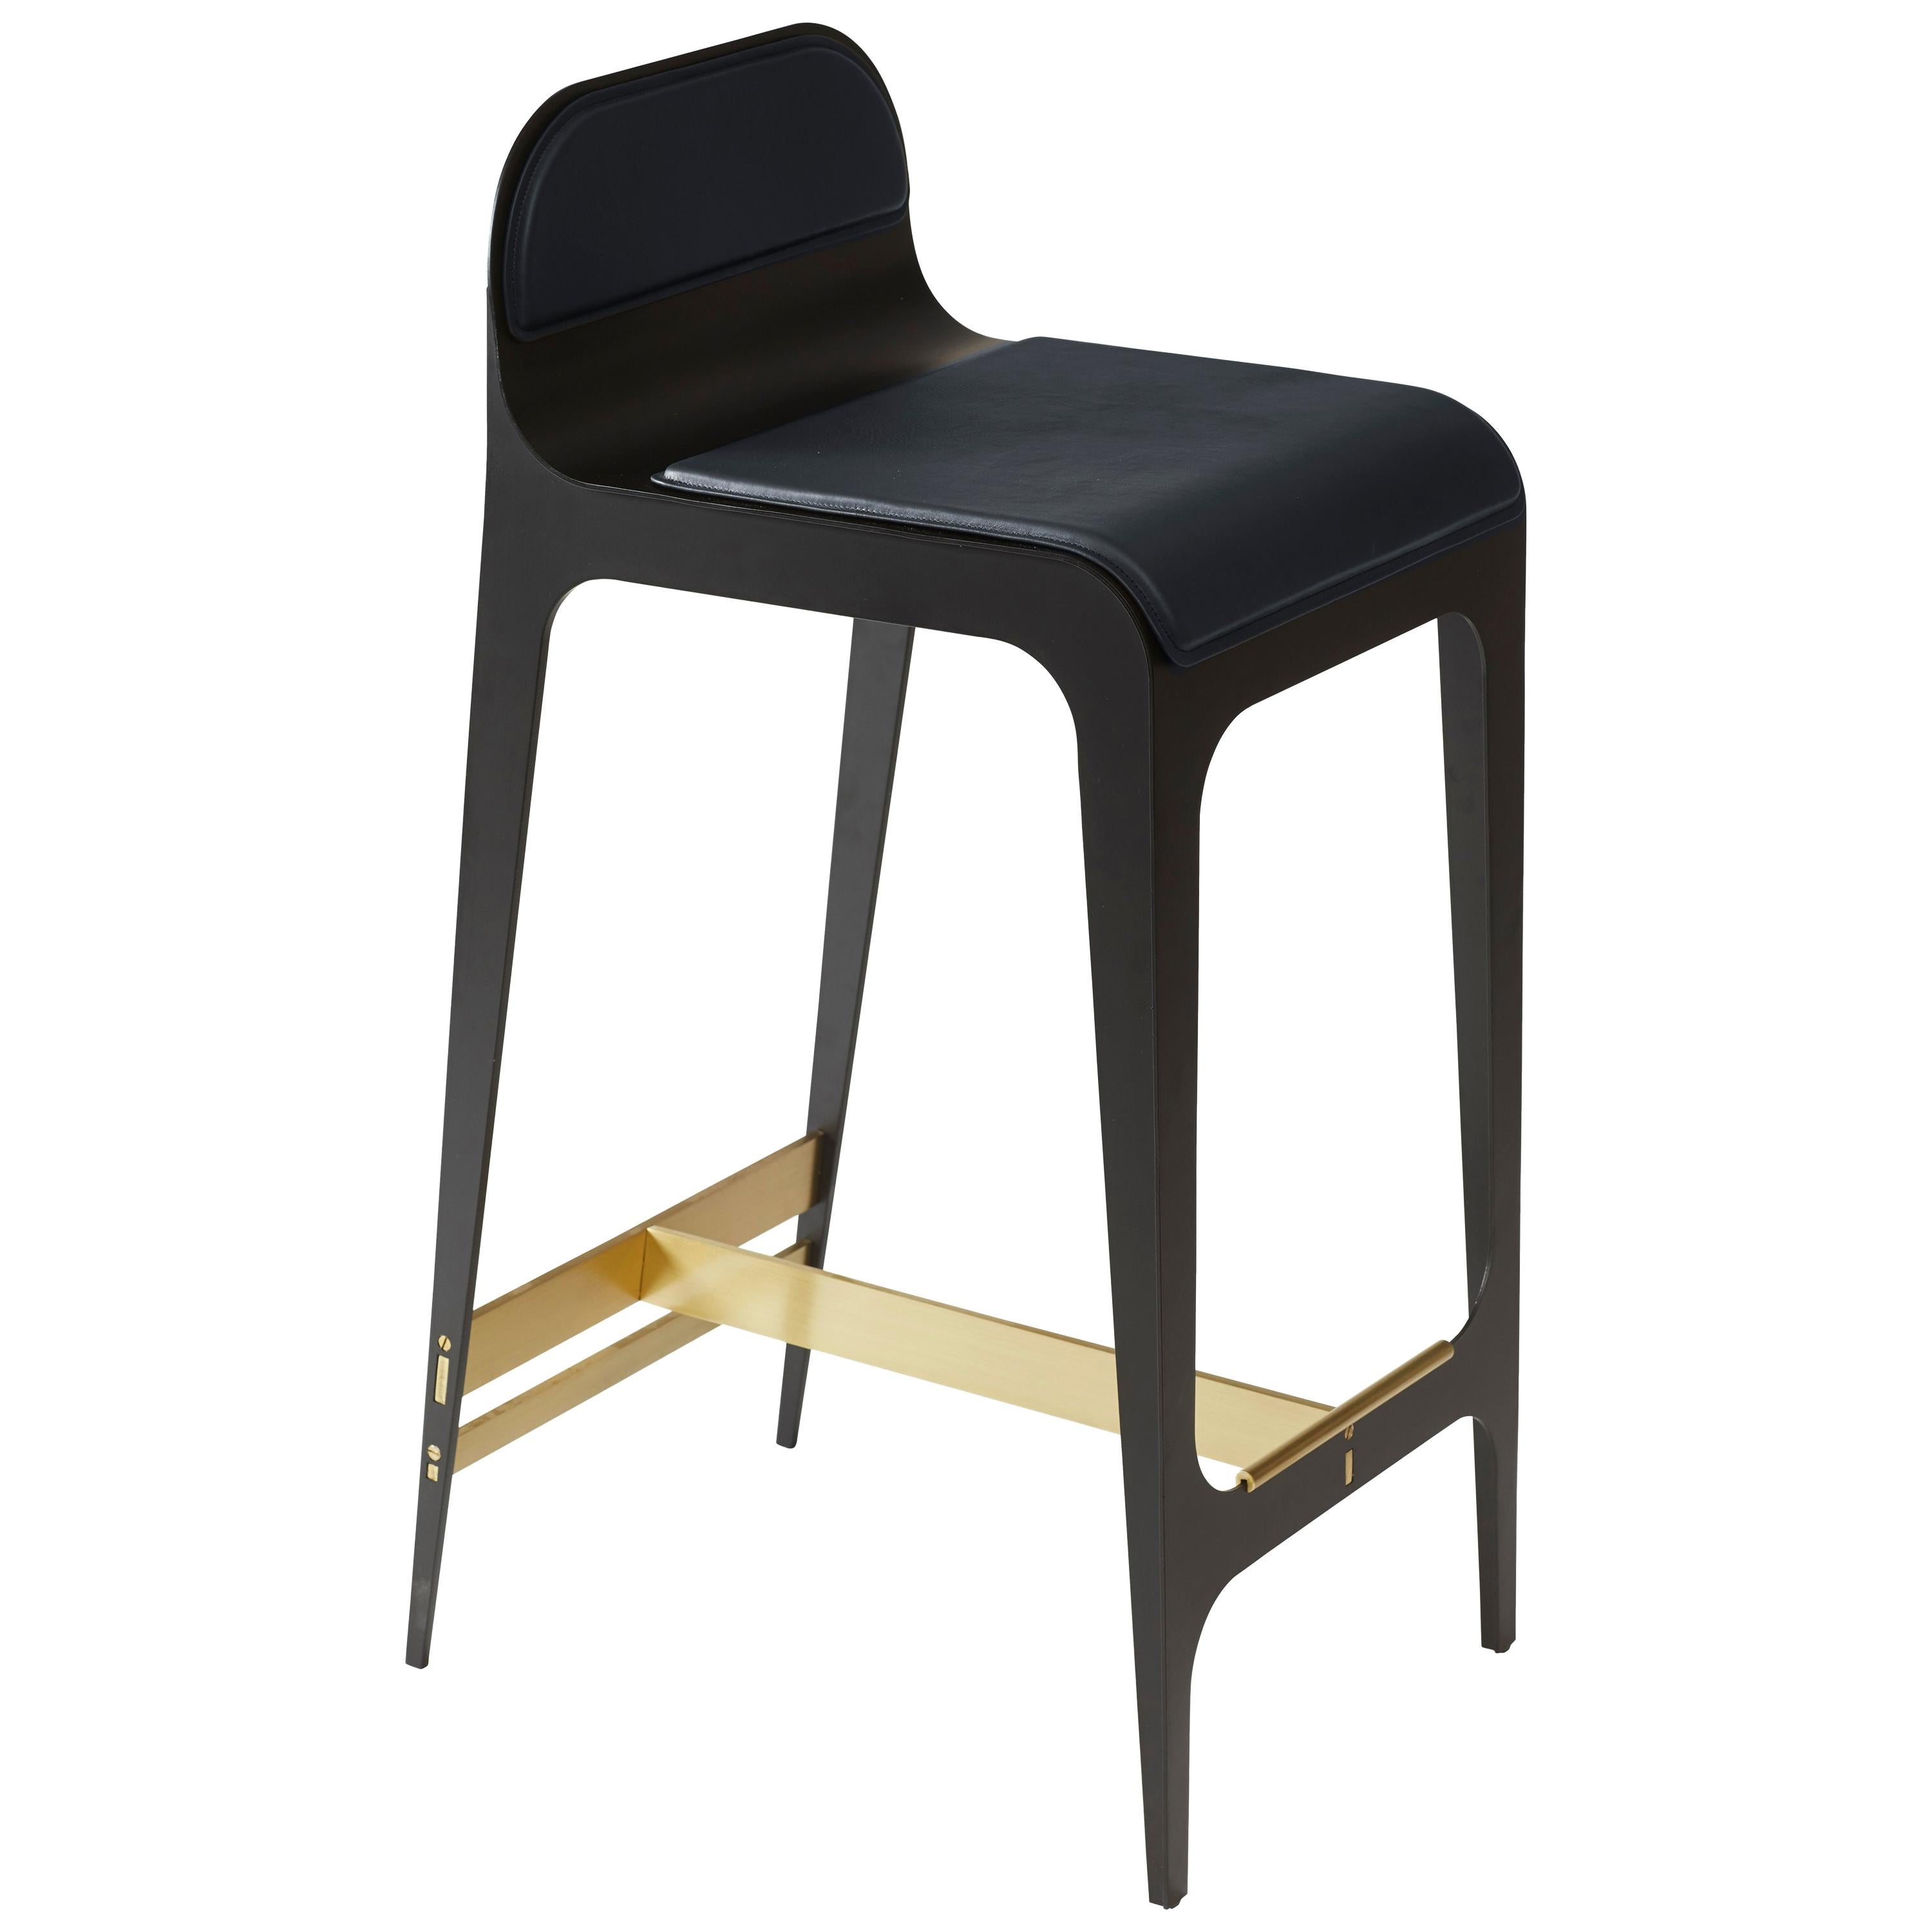 Blue (Navy Blue) Bardot Barstool with Leather Seat and Satin Brass Hardware by Gabriel Scott